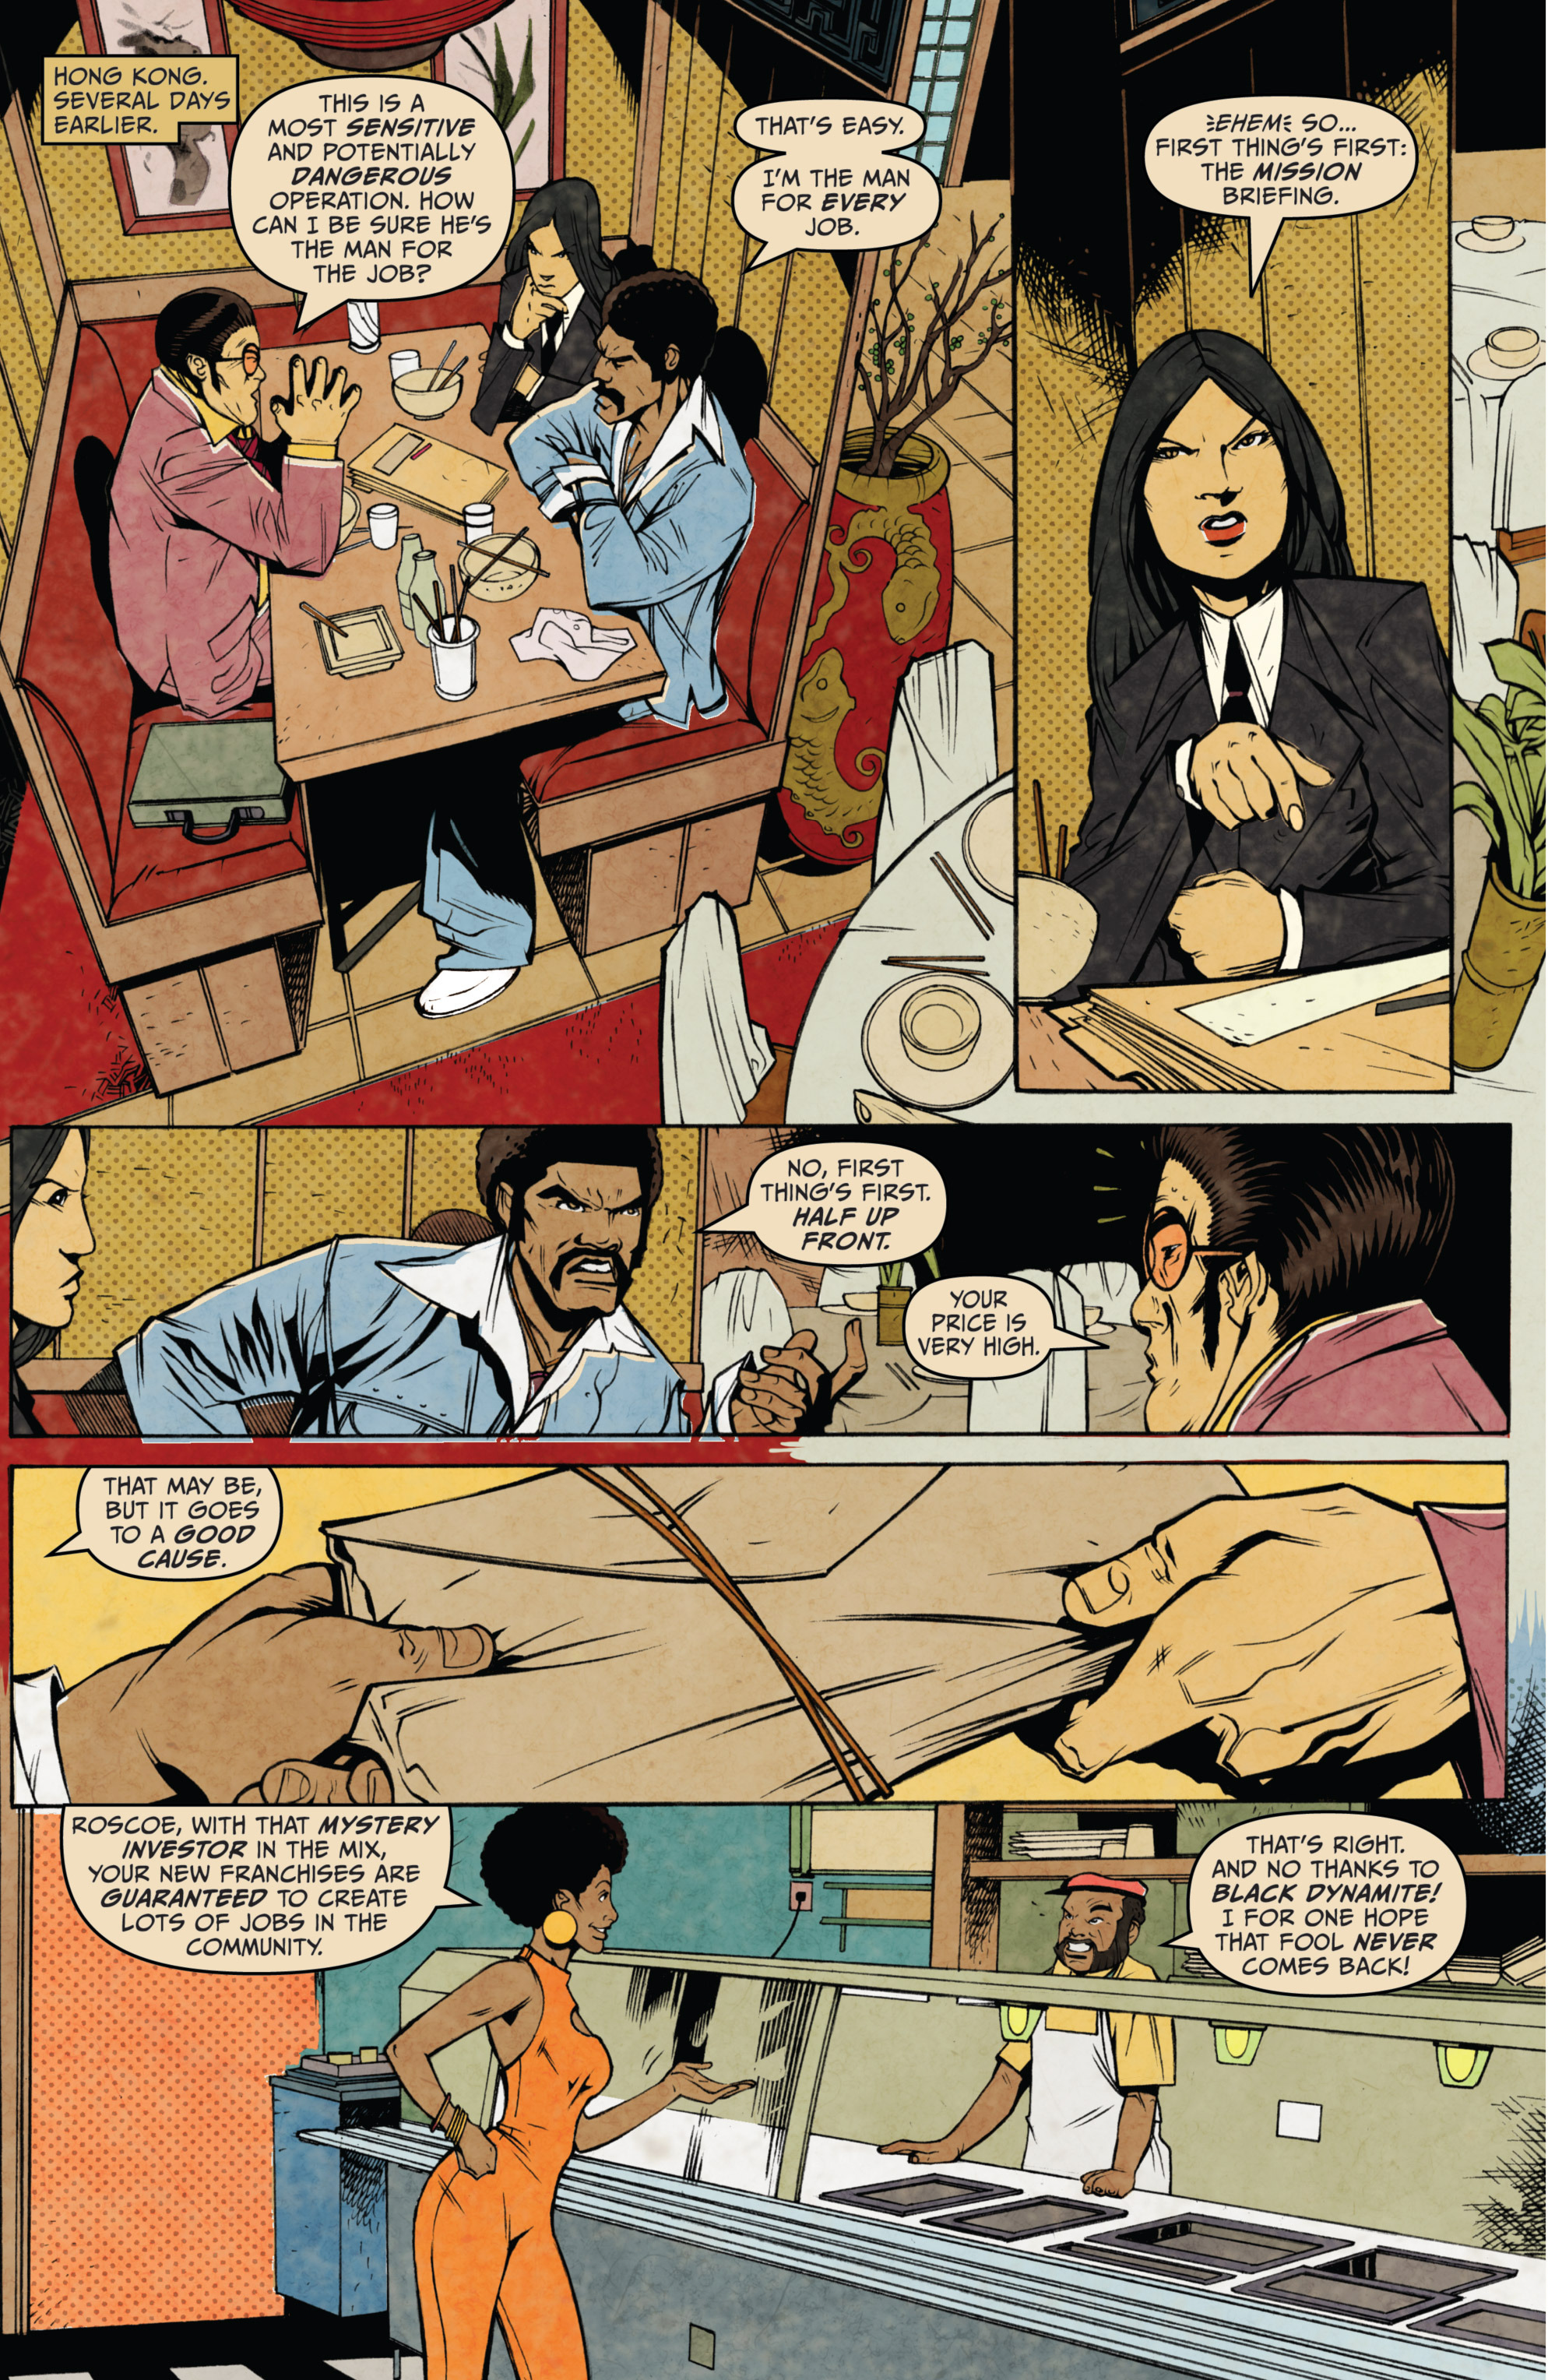 Black Dynamite Issue 3 | Read Black Dynamite Issue 3 comic online in high  quality. Read Full Comic online for free - Read comics online in high  quality .